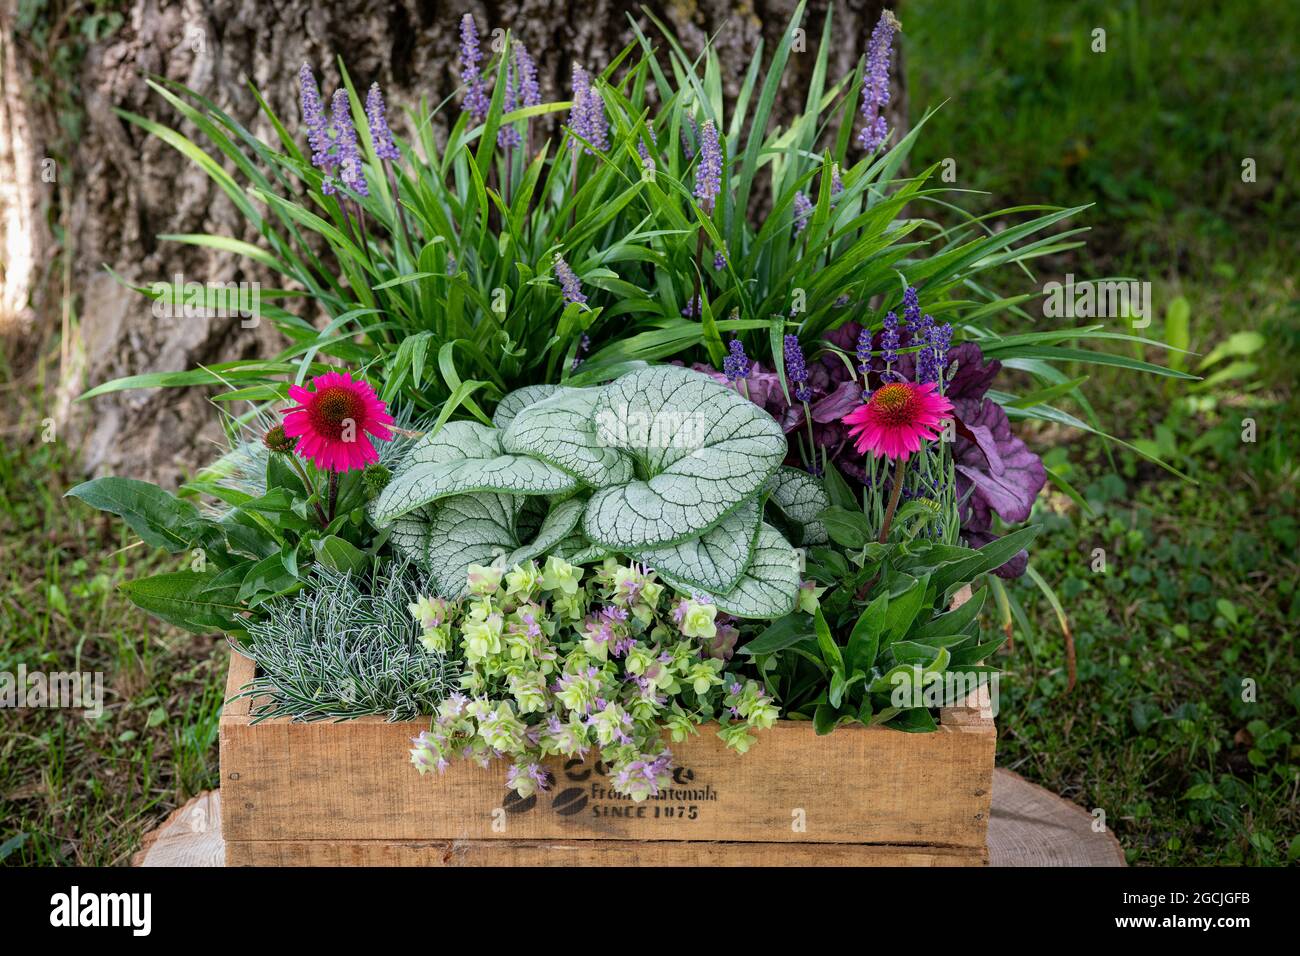 botany, autumnal plant box, FOR GREETING/POSTCARD-USE IN GERM.SPEAK.C CERTAIN RESTRICTIONS MAY APPLY Stock Photo